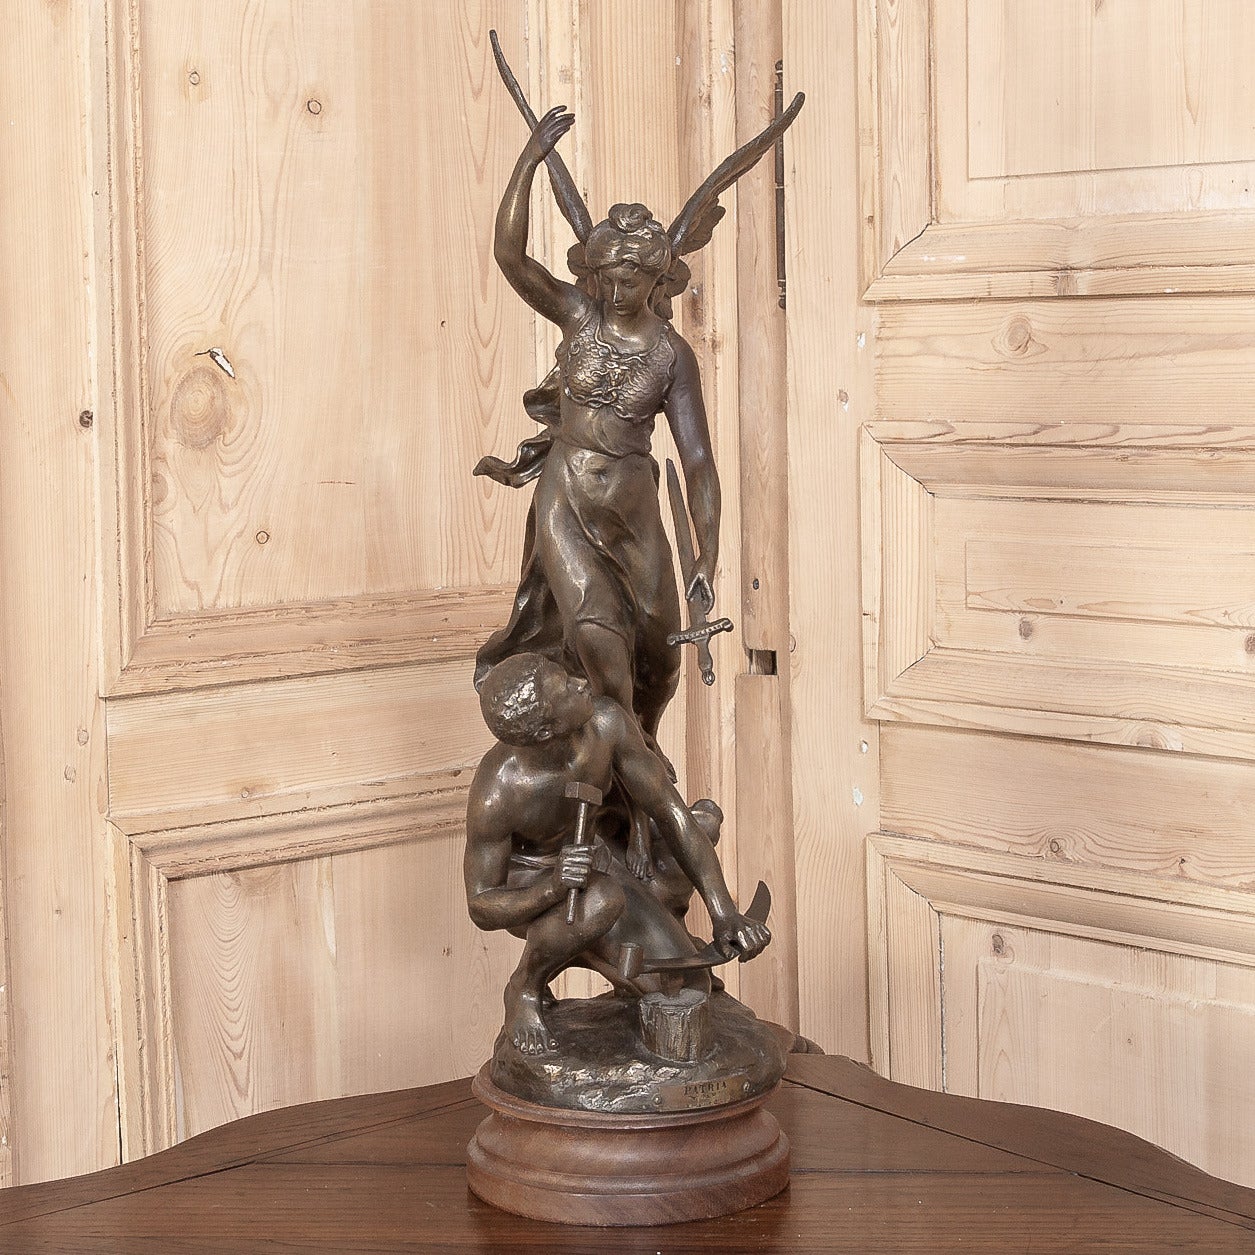 A spelter rendition of the bronze statue that won sculptor Charles Vely a gold medal at the Paris Exposition, this work glorifies the work of the farmer or artisan tool maker in their roles of supporting the patriotic goals of the French